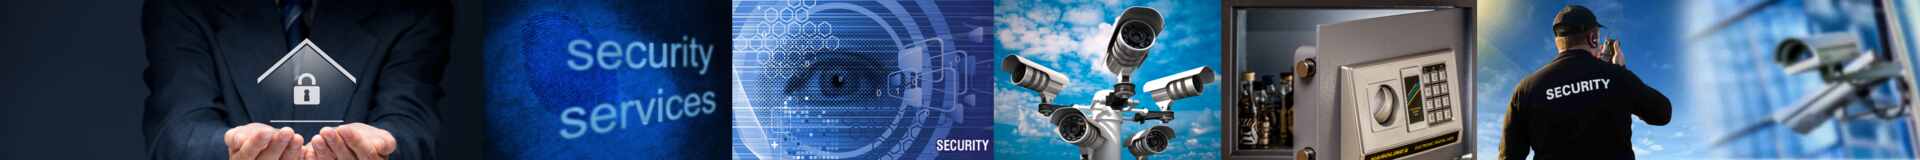 Global Security Services bids and RFP from Denmark